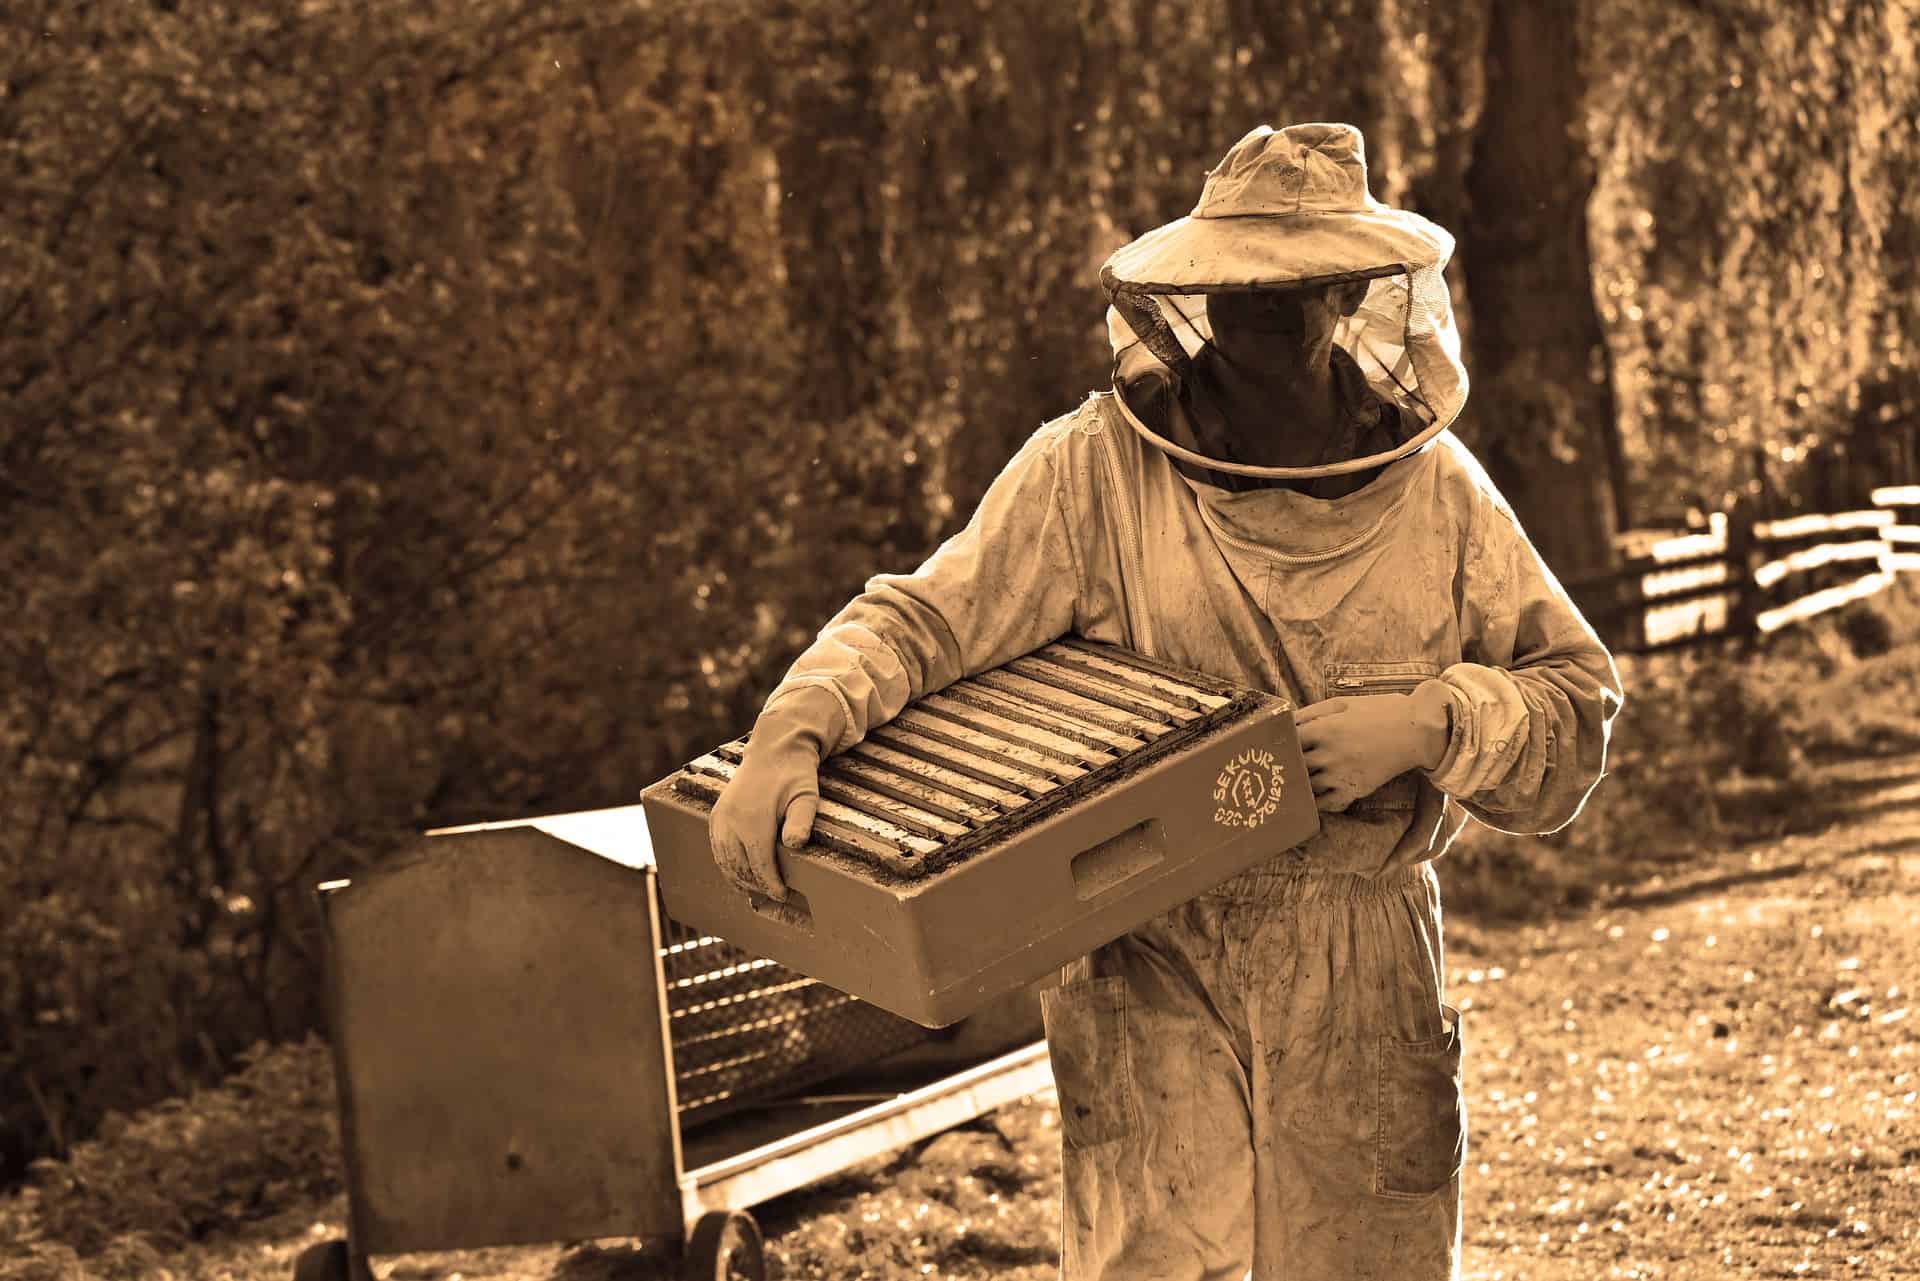 How to clean your beekeeping equipment